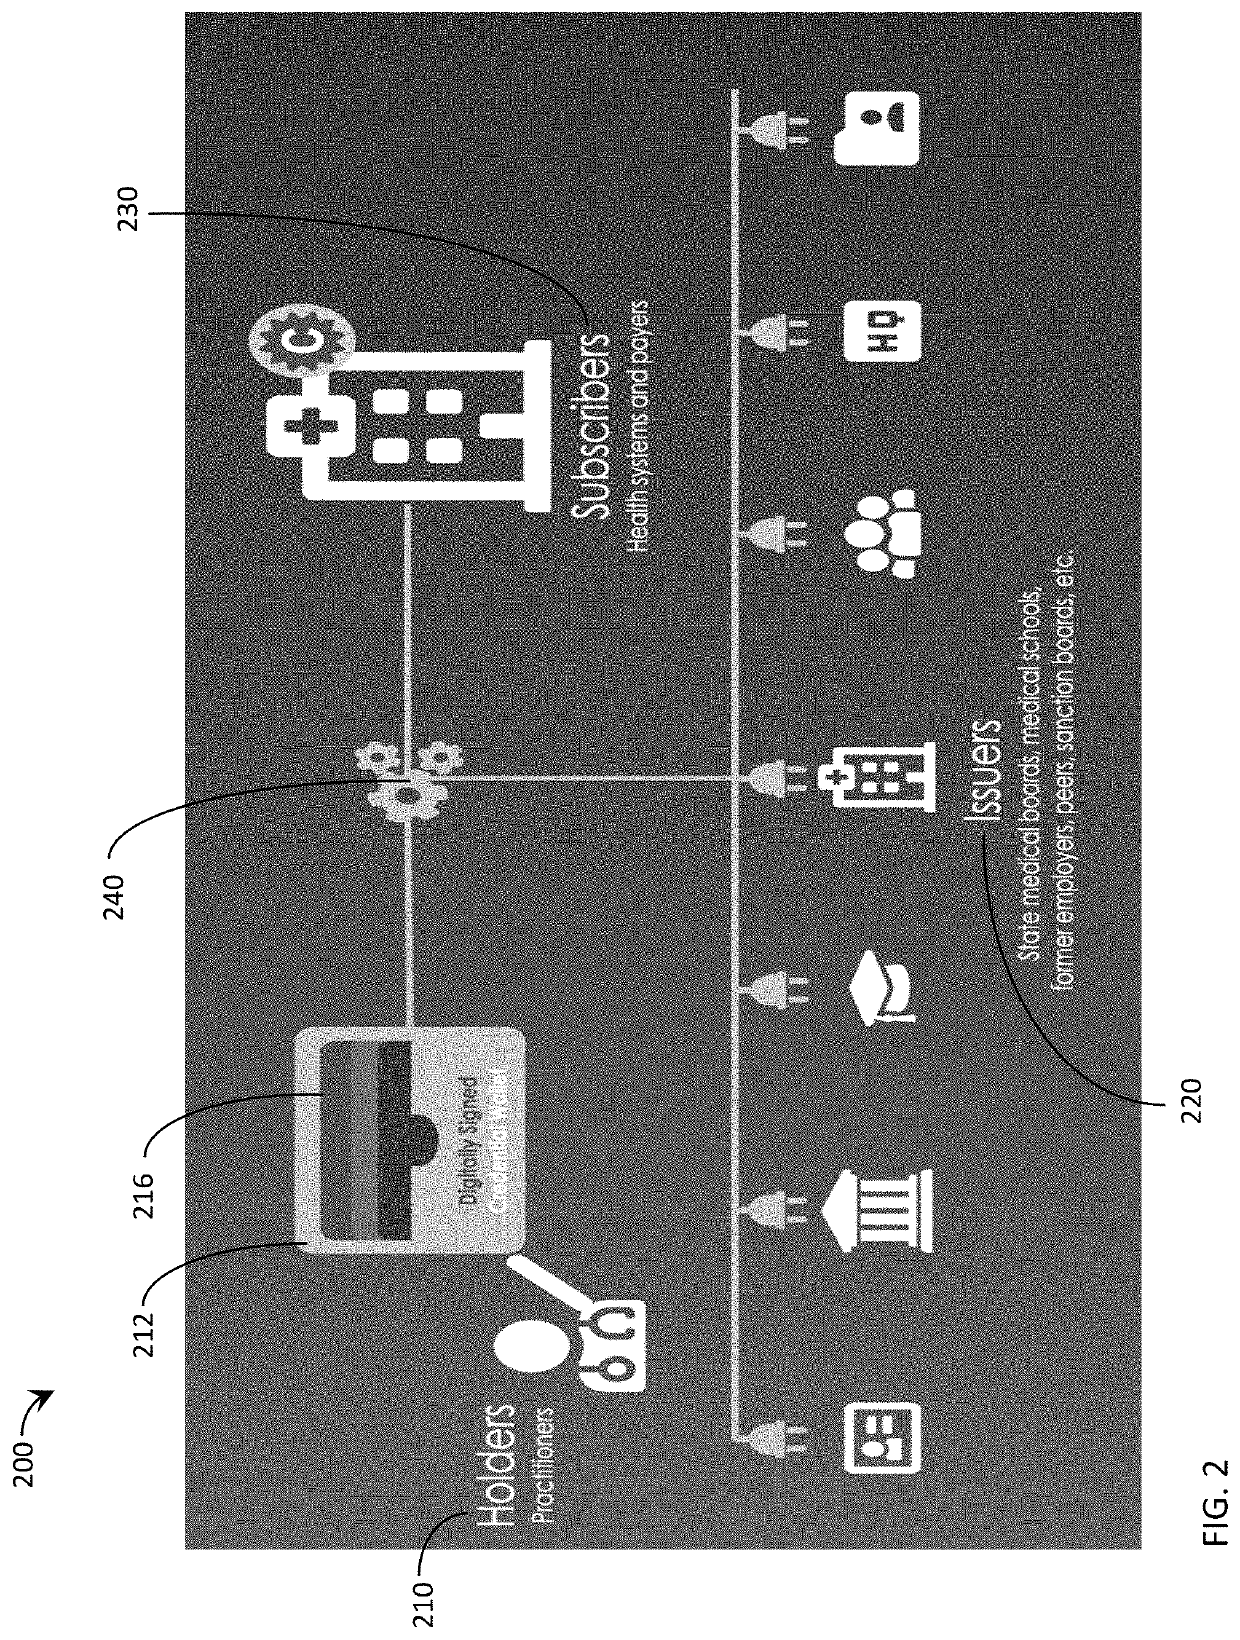 Systems and methods for verifying and managing digital credentials